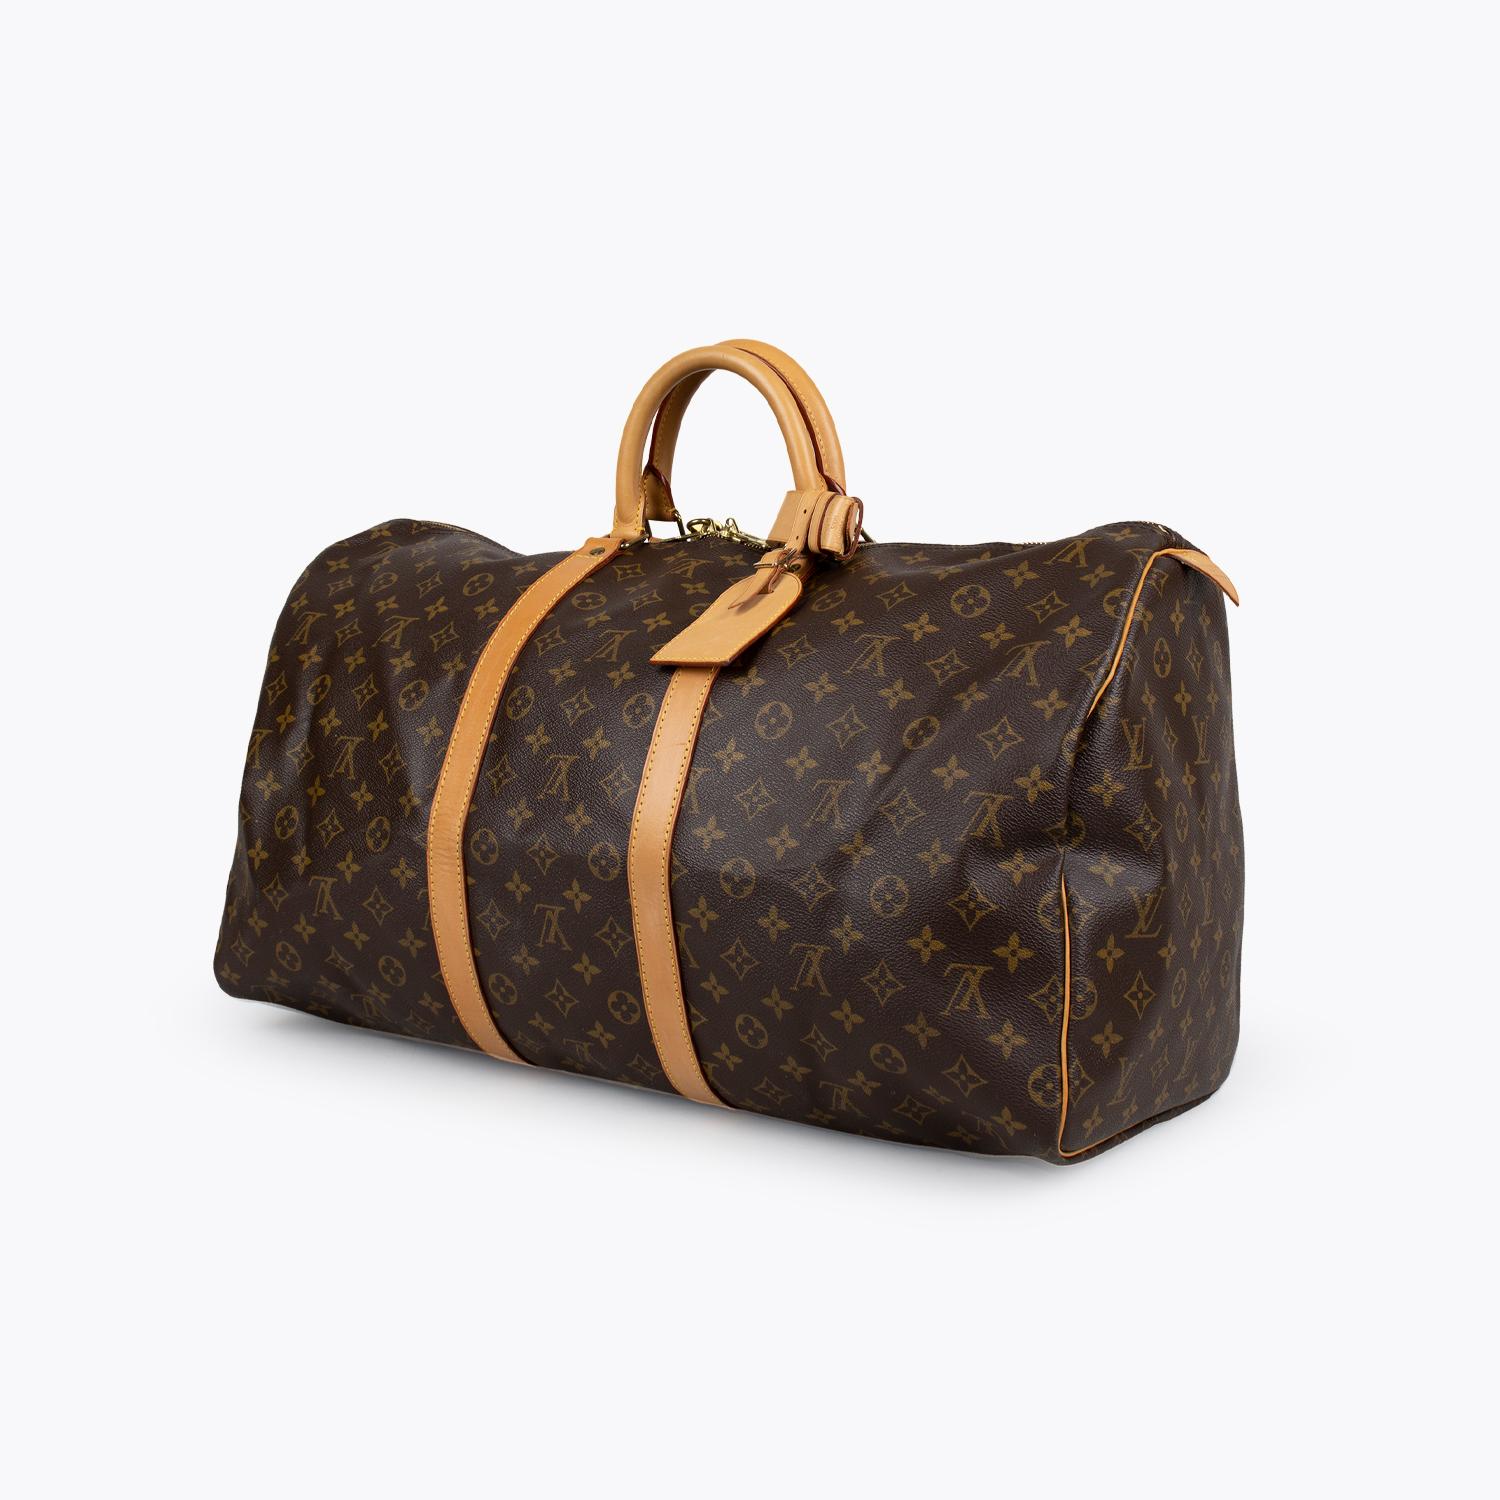 Louis Vuitton Keepall Monogram 55 Bag In Good Condition For Sale In Sundbyberg, SE